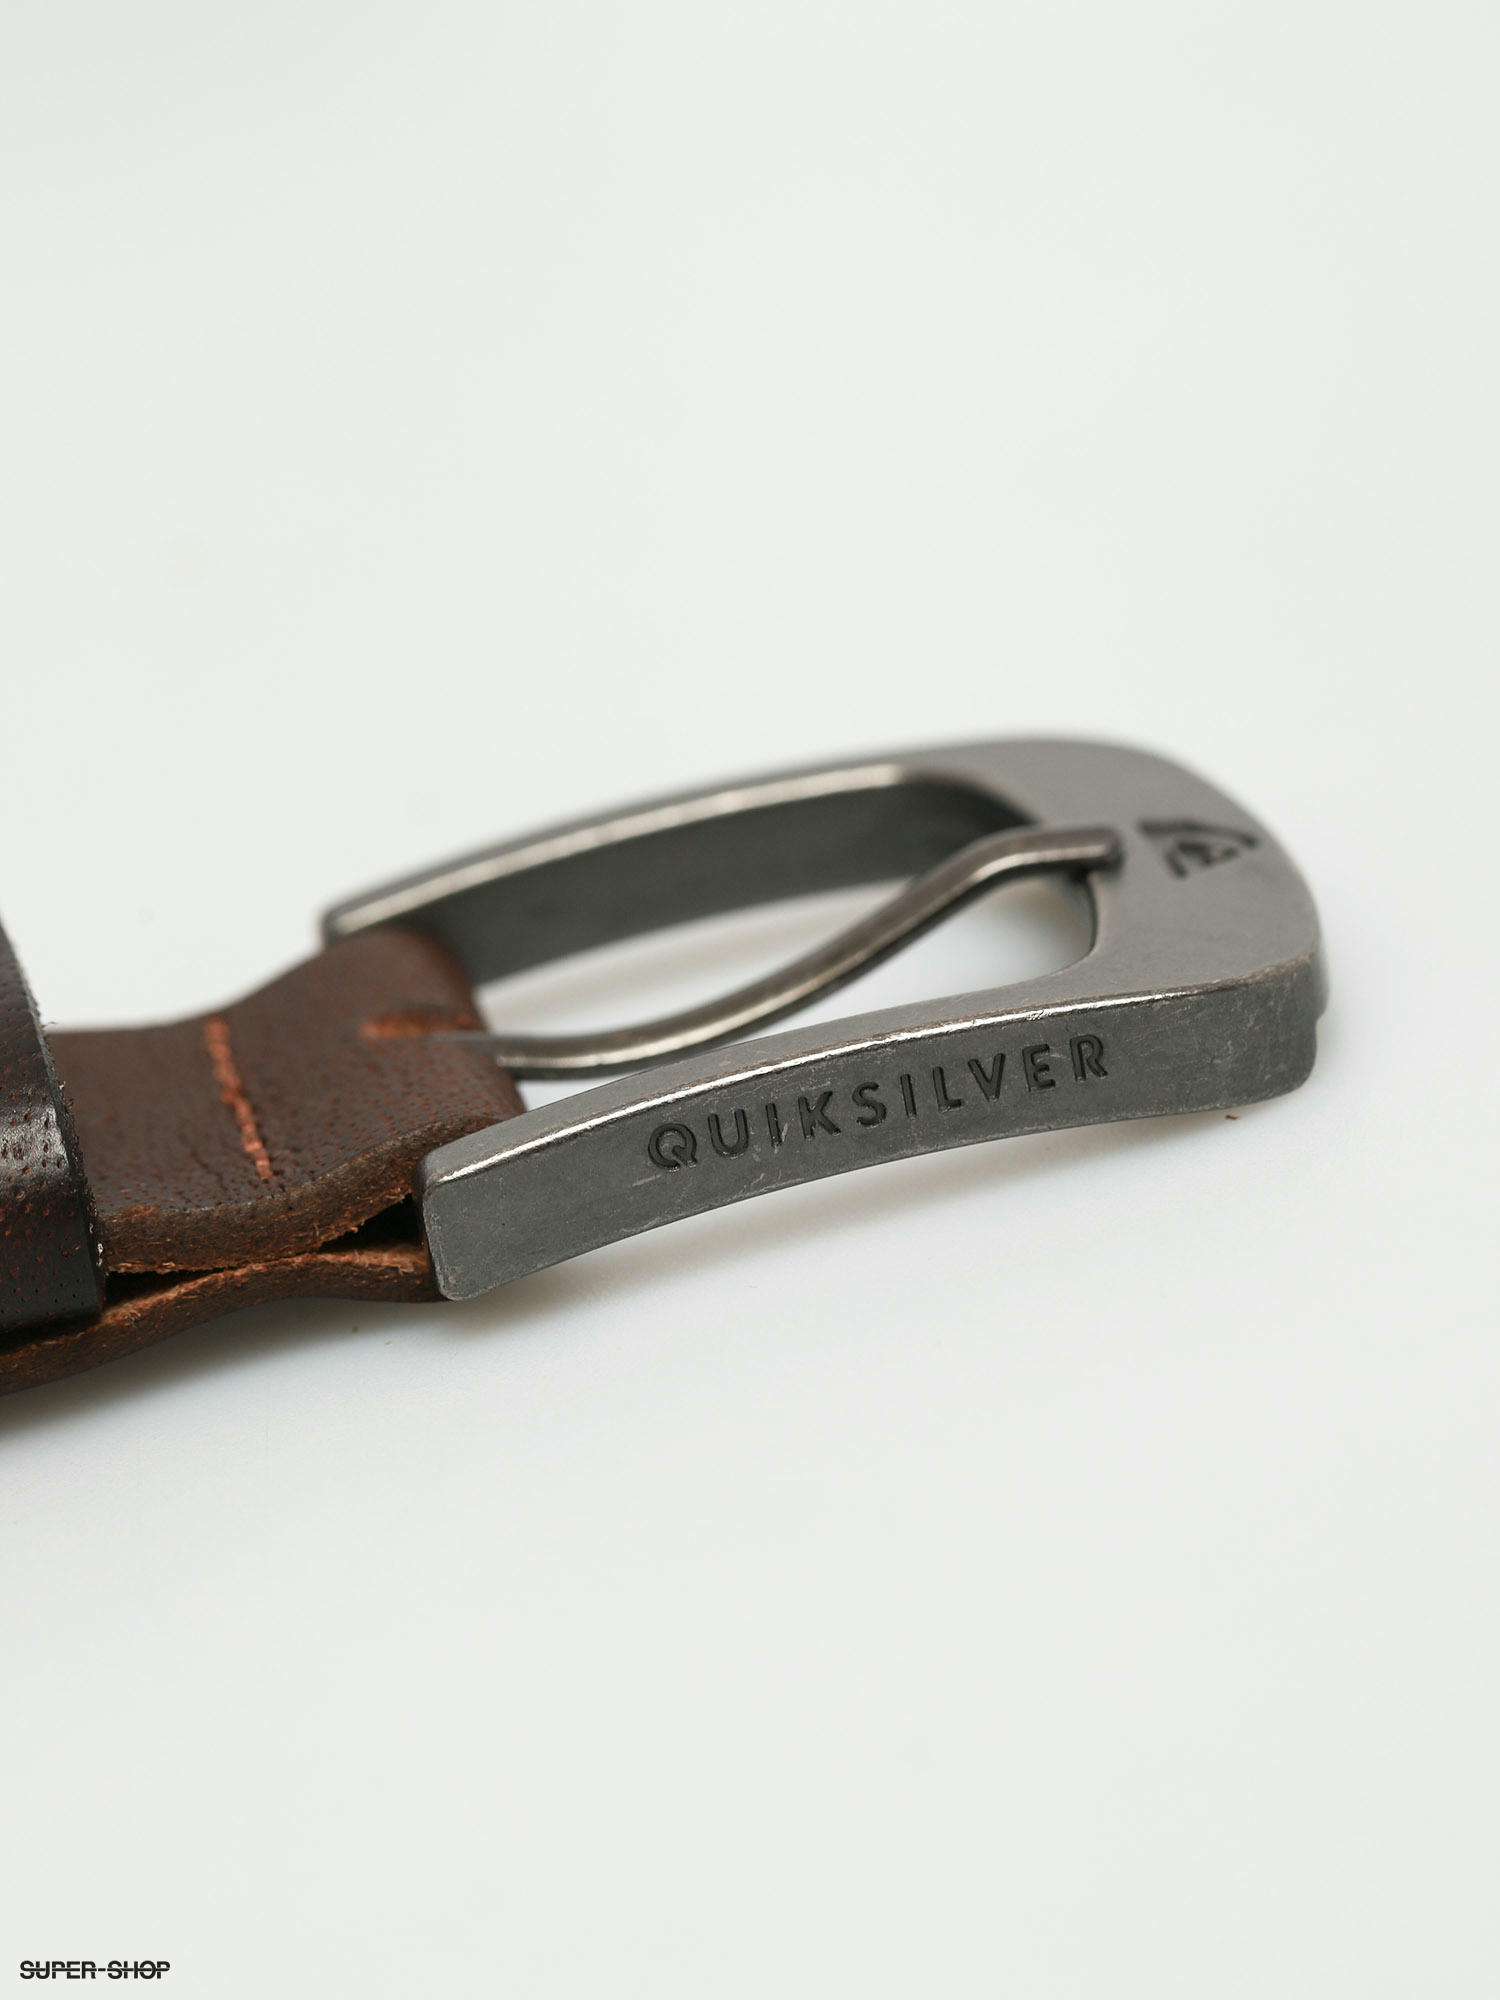 3 Everydaily Belt Quiksilver (chocolate) The